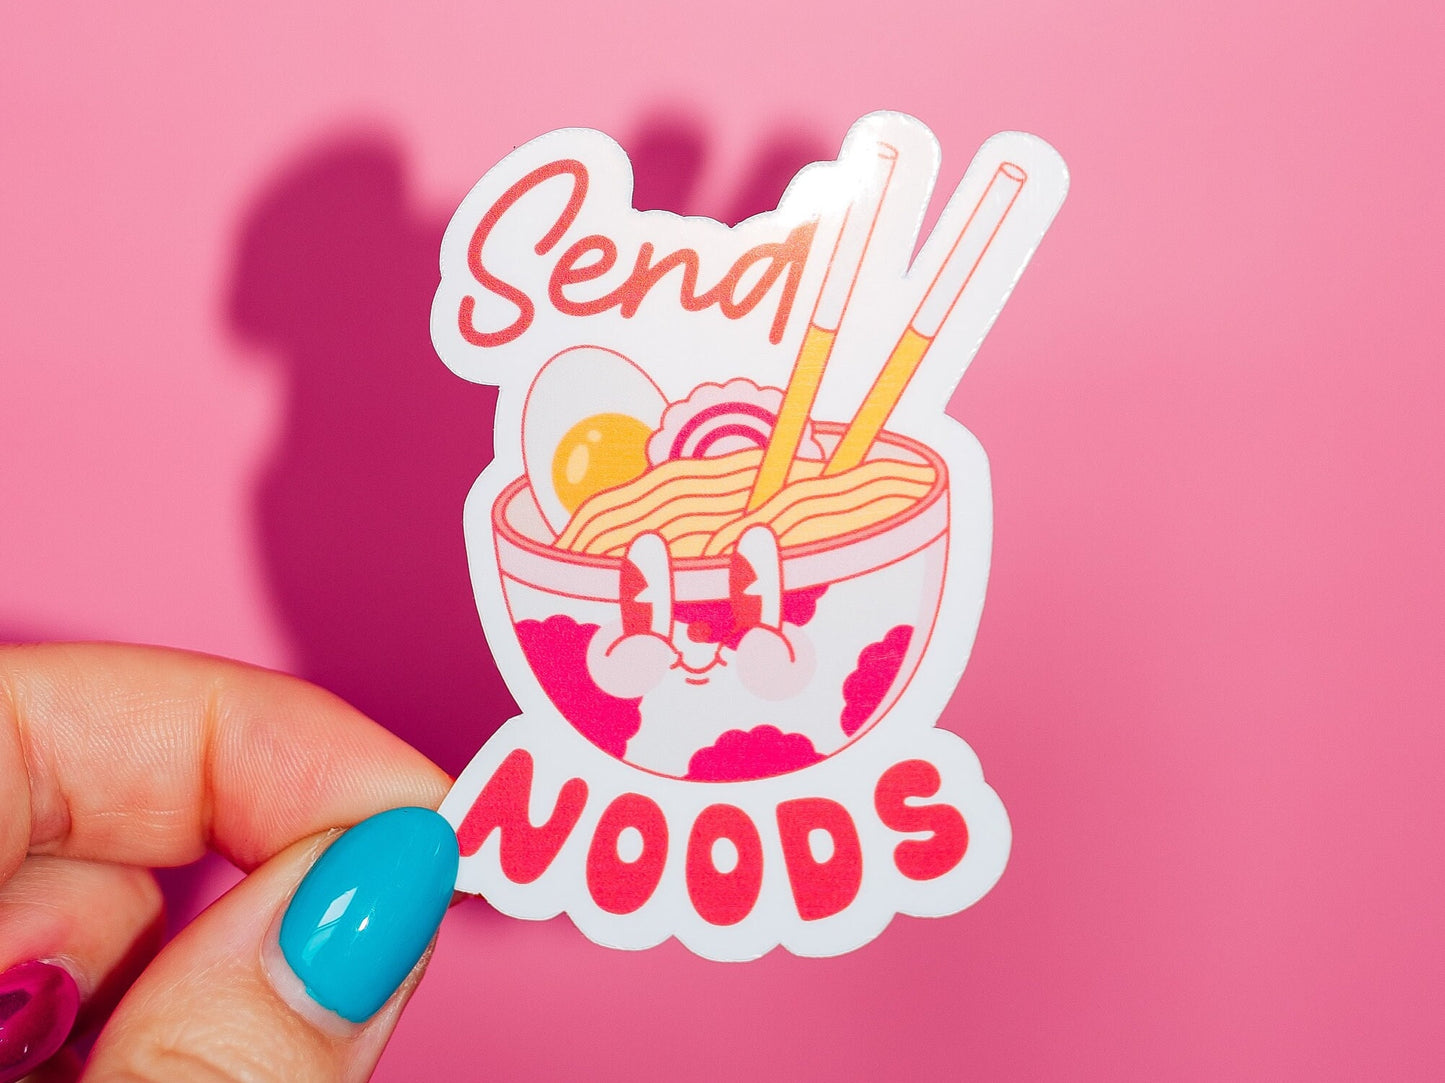 Send Noods Sticker, Sexy Foodie, Ramen Noodles, Valentine's Day, Self Love, Funny Humor, Trendy Aesthetic, Kawaii Vibes, Culture Cuisine